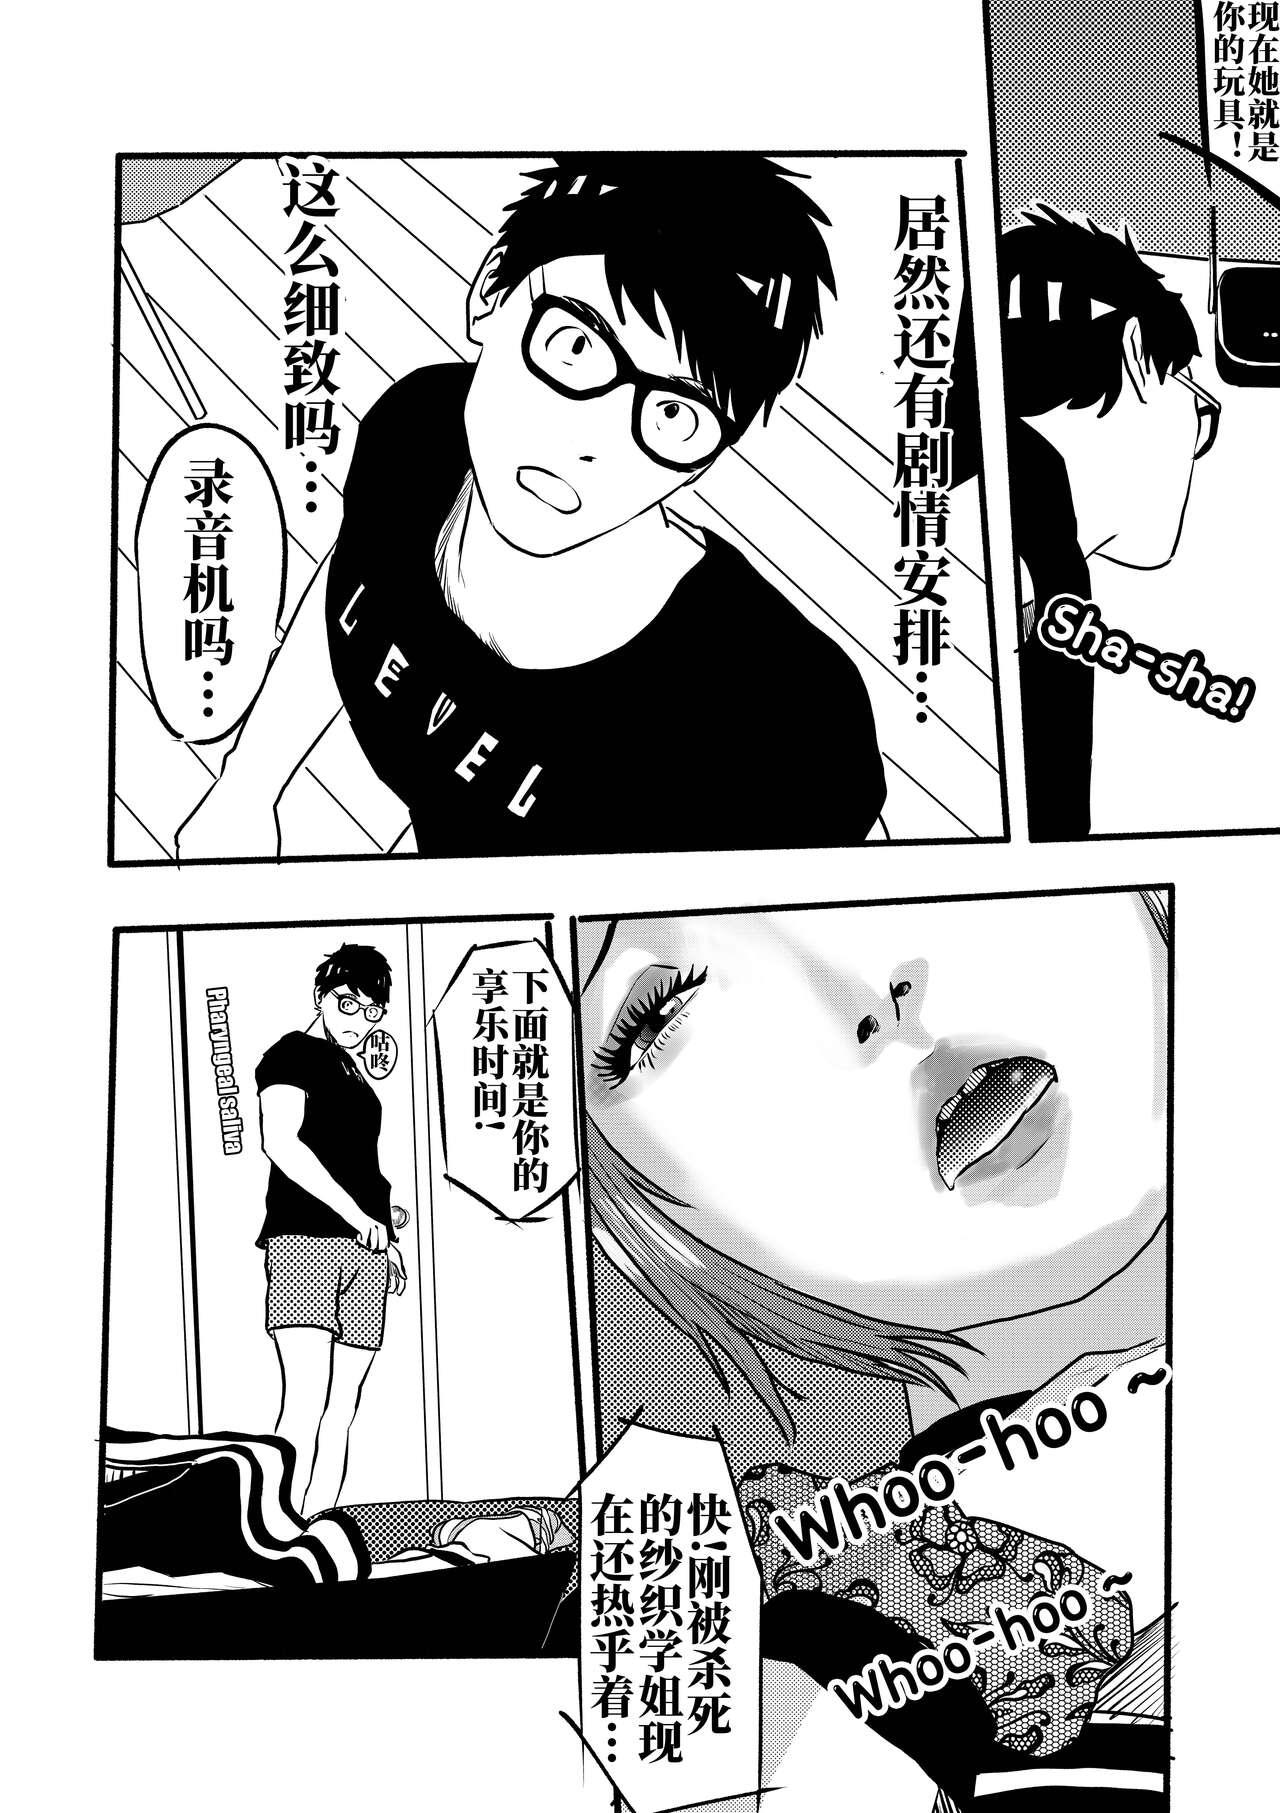 [KAO.YELLOW STUDIO (T.C.X)] I must be out of my mind to fall in love with SAORI, the Snuff Queen Ch.1-16 | 想与冰恋女王纱织同学谈恋爱的我脑子一定有问题 第1-16话 [Chinese] 35